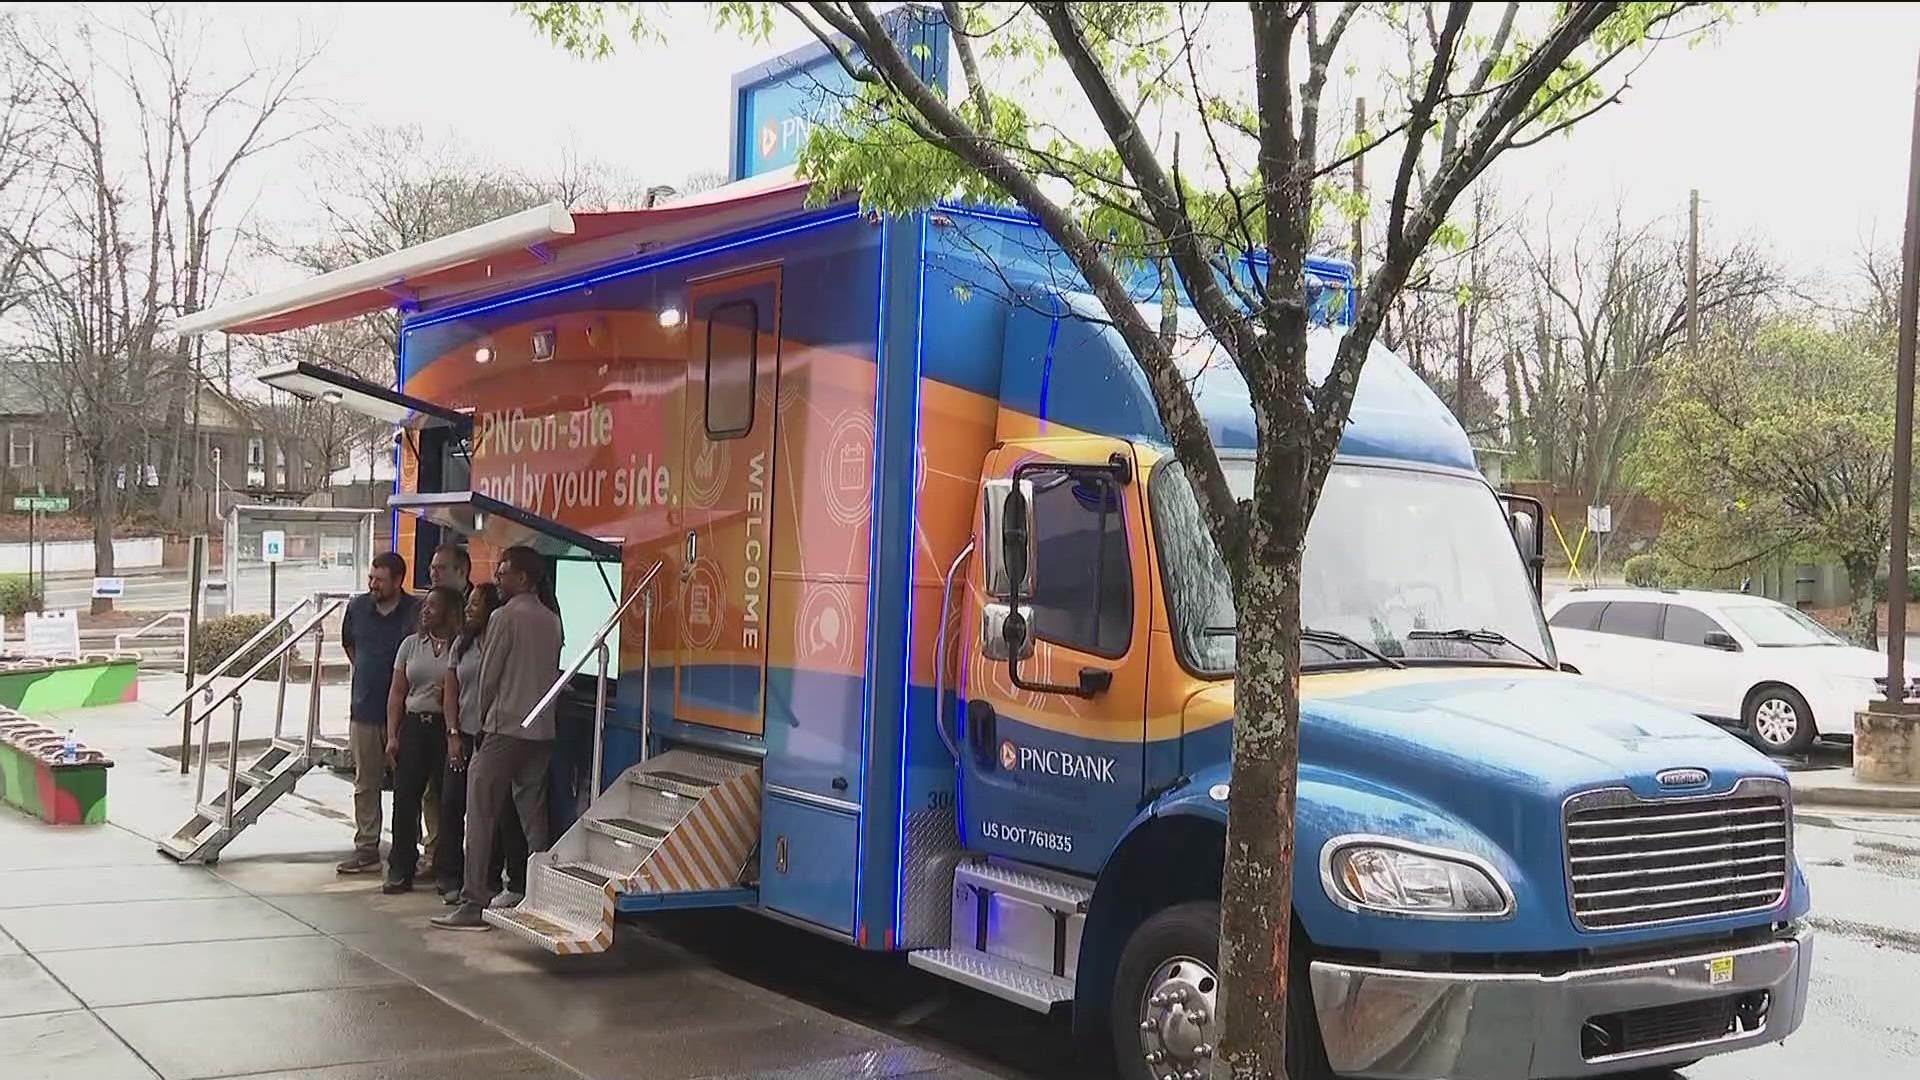 There's a new truck bringing the bank to you. It's a mobile PNC Branch Bank off McDonough Blvd and people can walk to get the services they need.